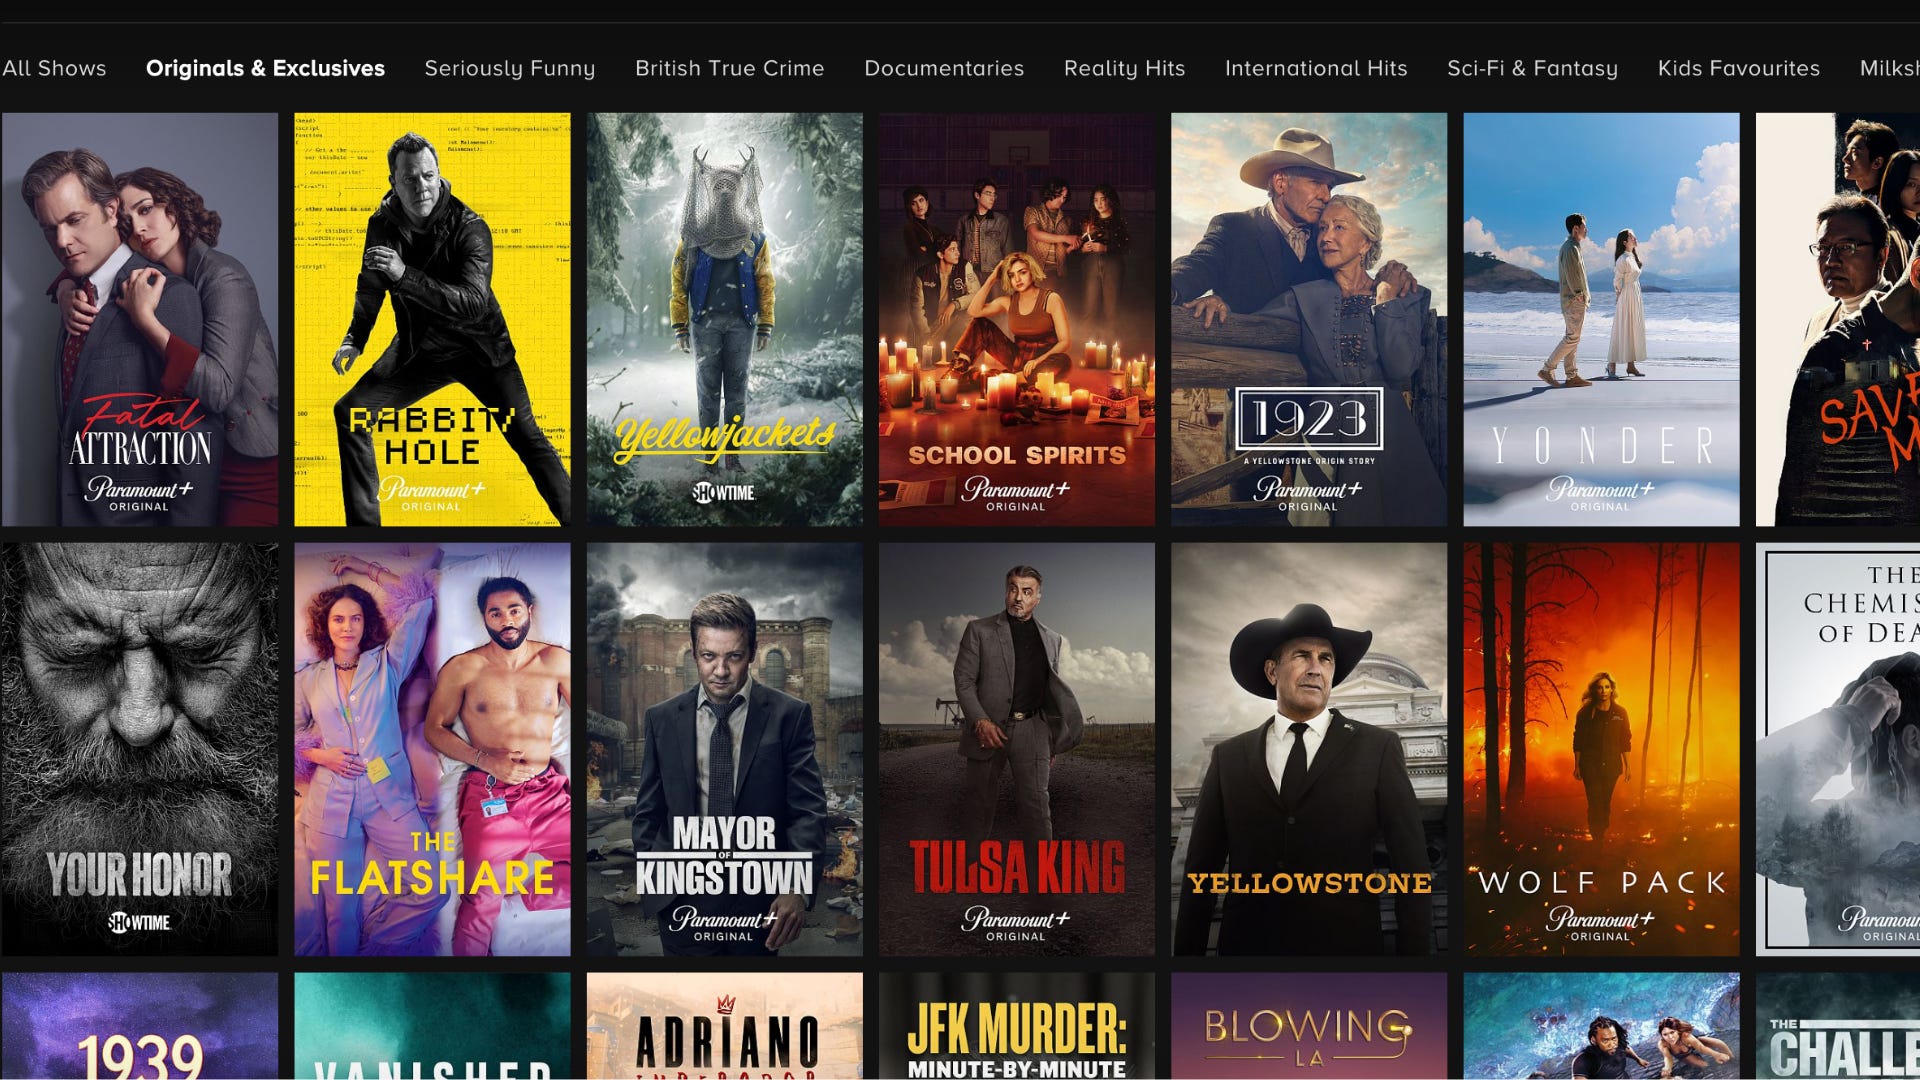 Watch Most Popular Movies on Paramount+ - Try for Free